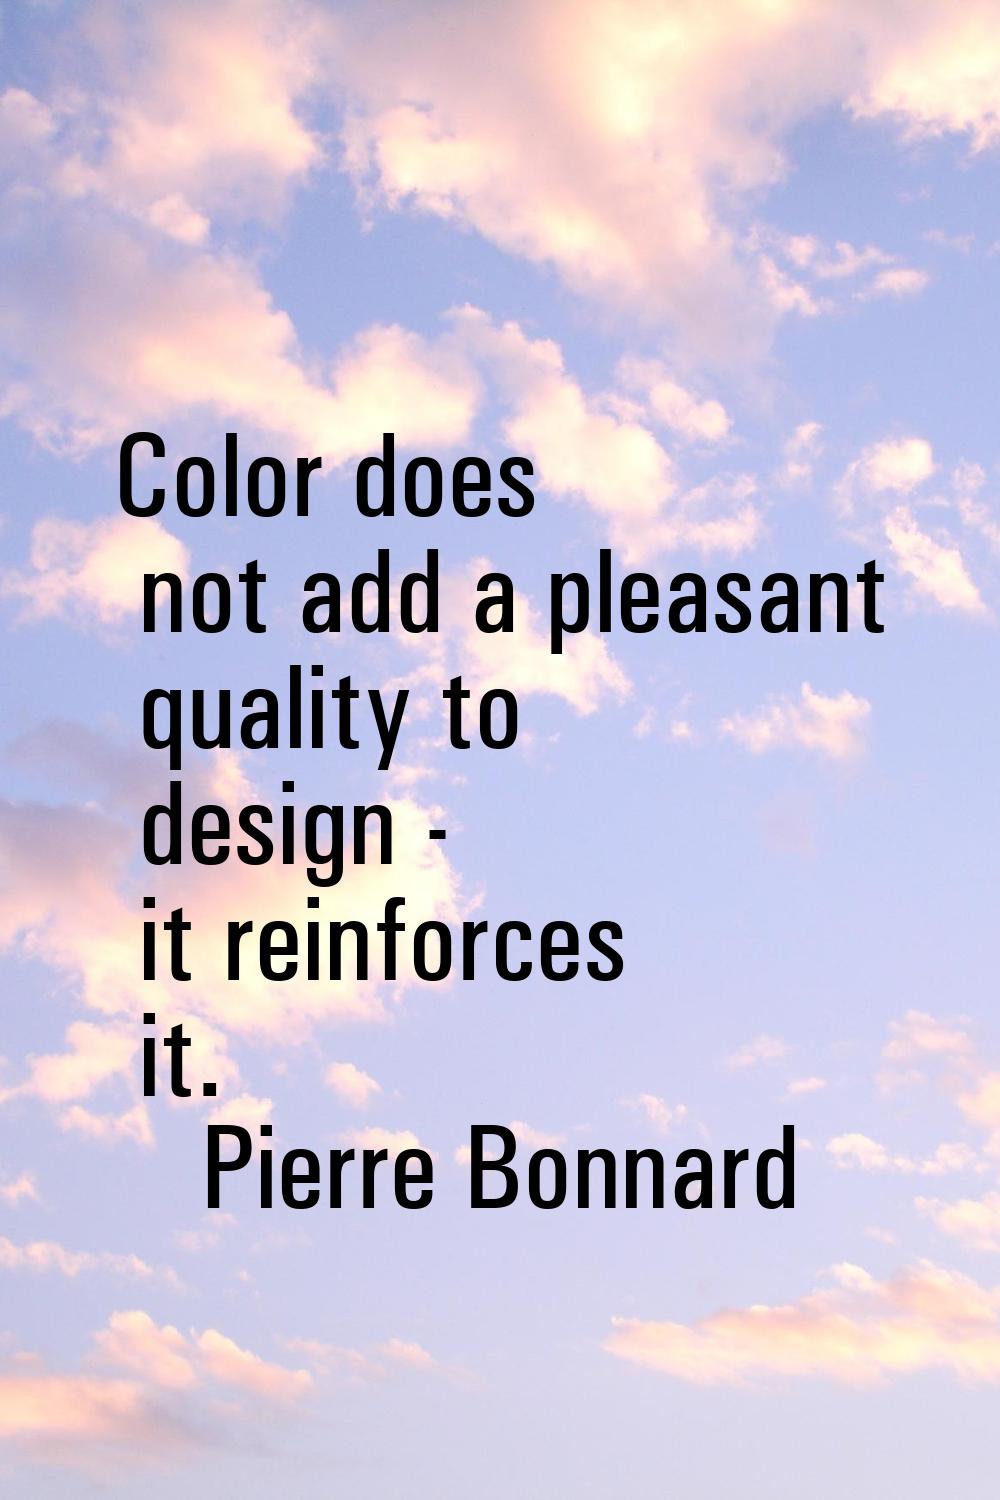 Color does not add a pleasant quality to design - it reinforces it.